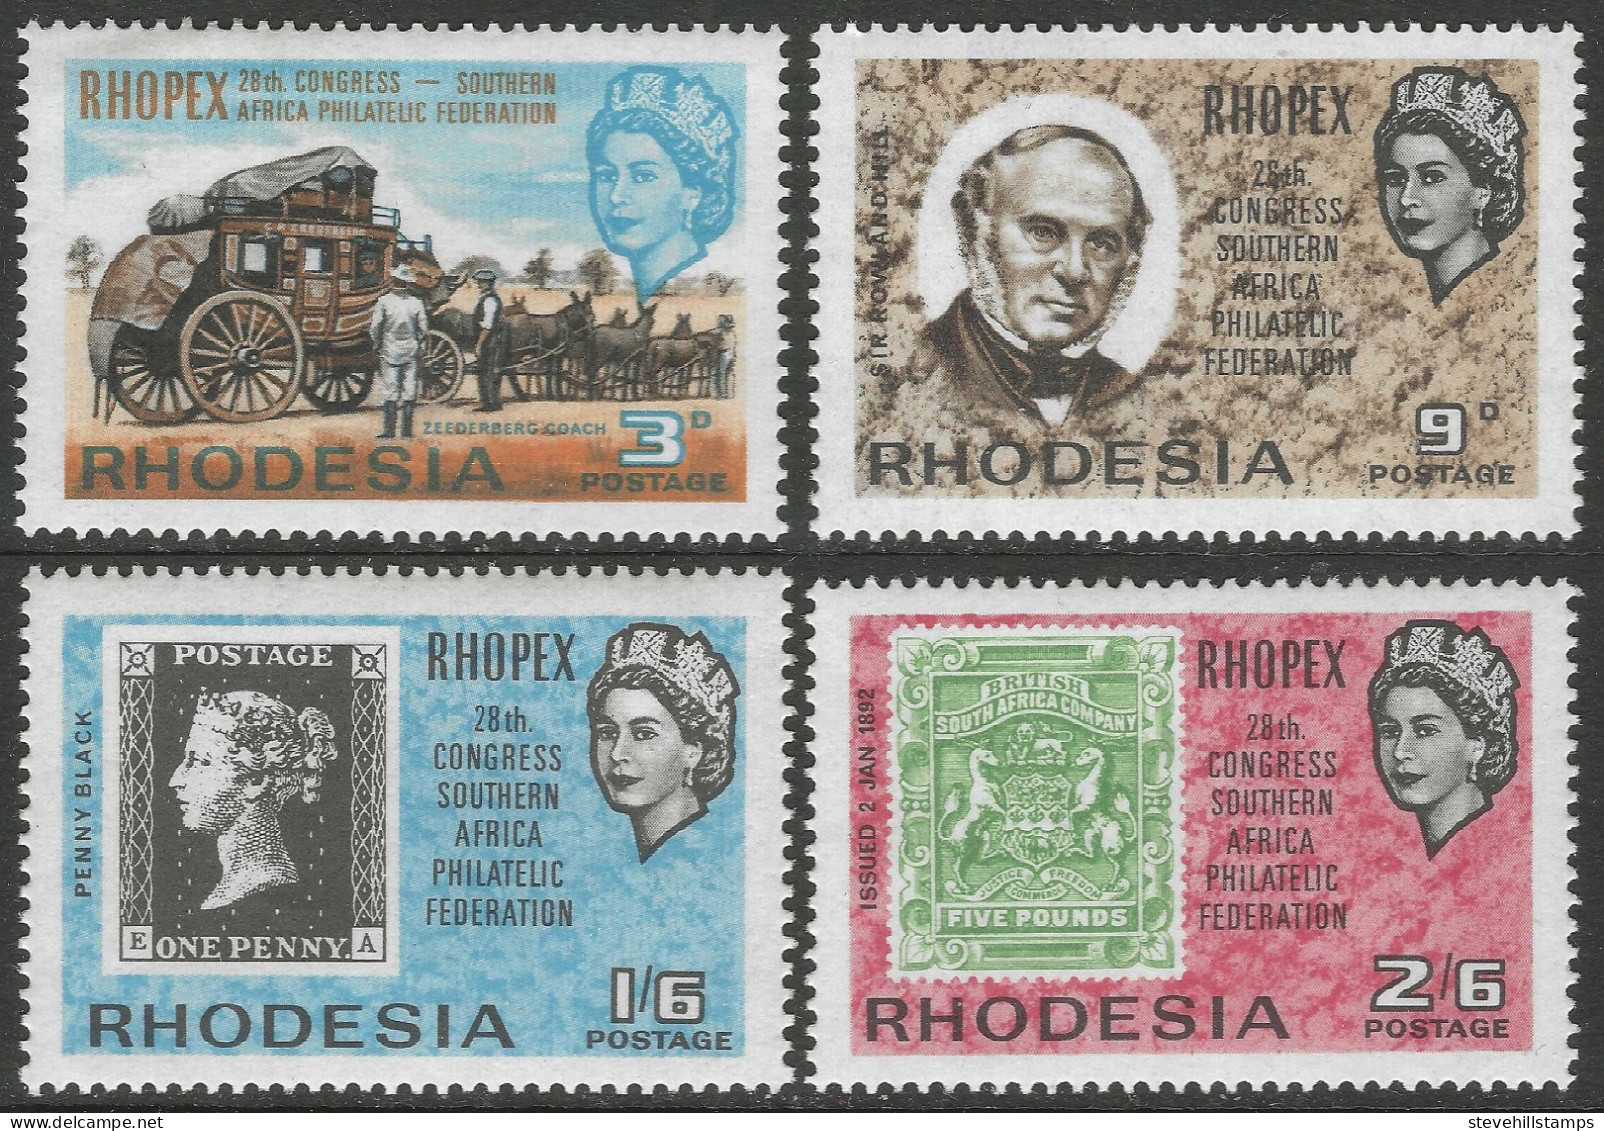 Rhodesia. 1966 28th Congress Of Southern Africa Philatelic Federation (RHOPEX). MH Complete Set. SG 388-391 - Rhodesia (1964-1980)